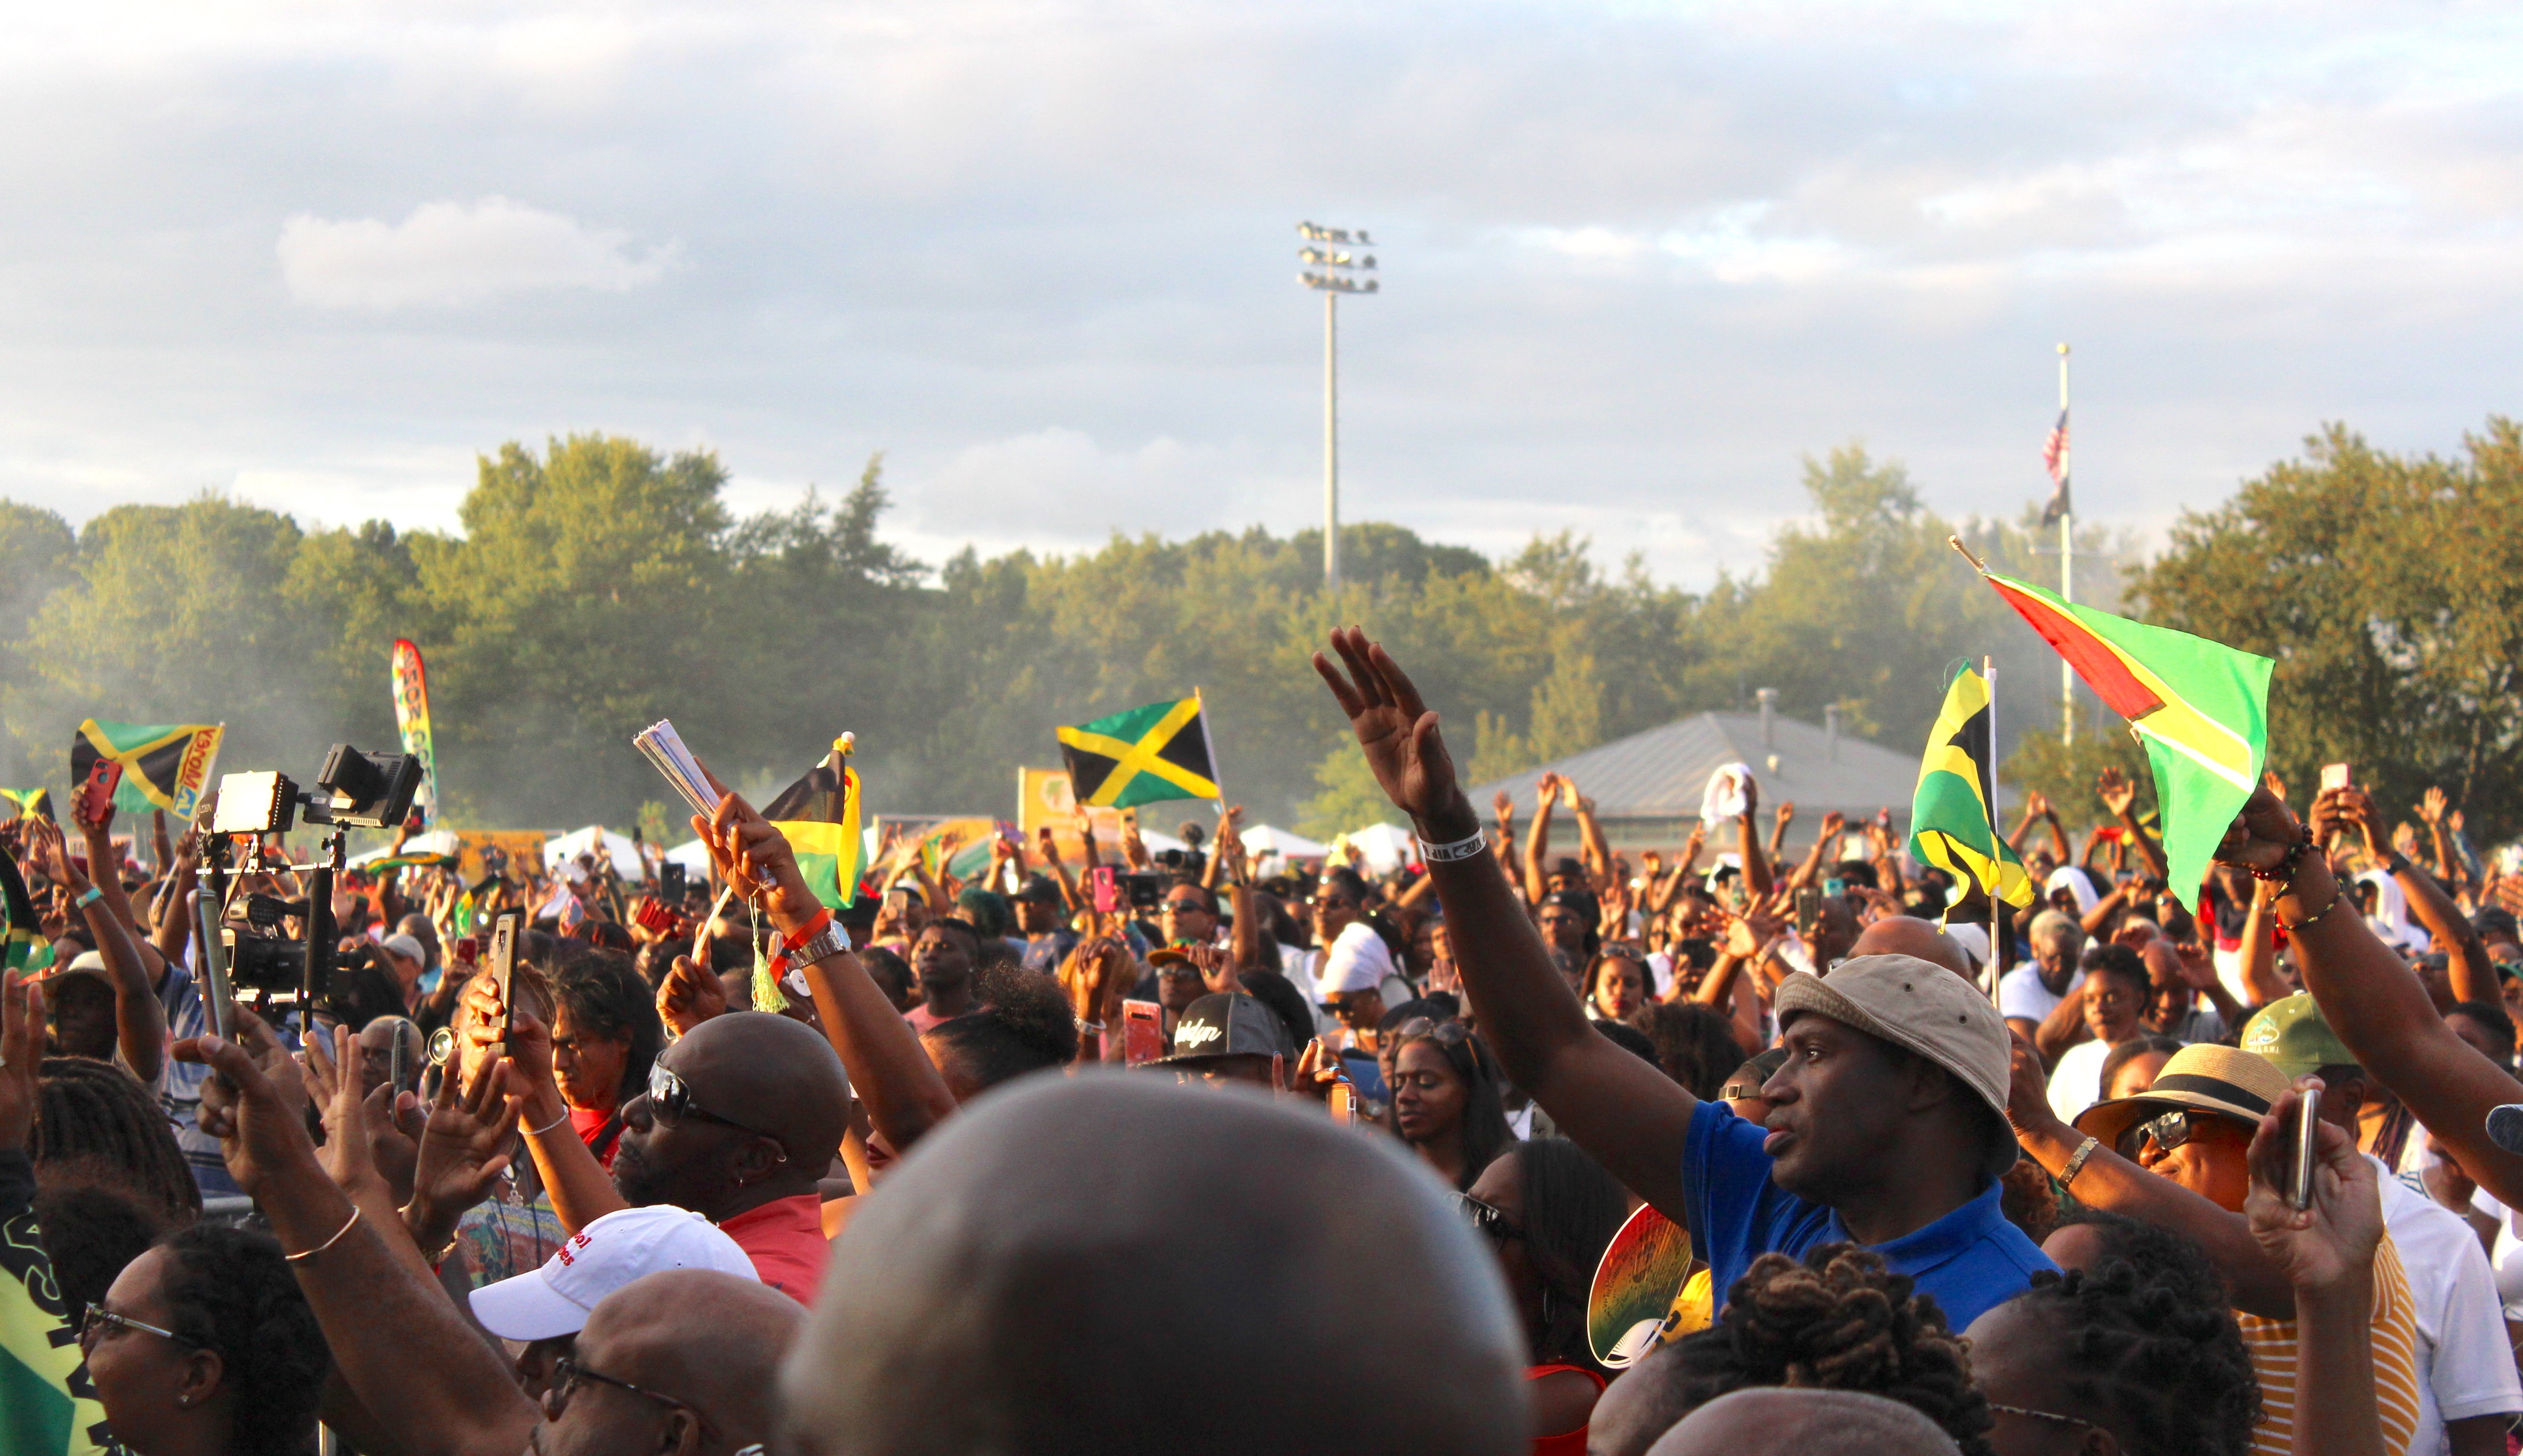 Grace Jerk Festival Brings Fete, Fine Fare and Flair to its Annual Family Affair